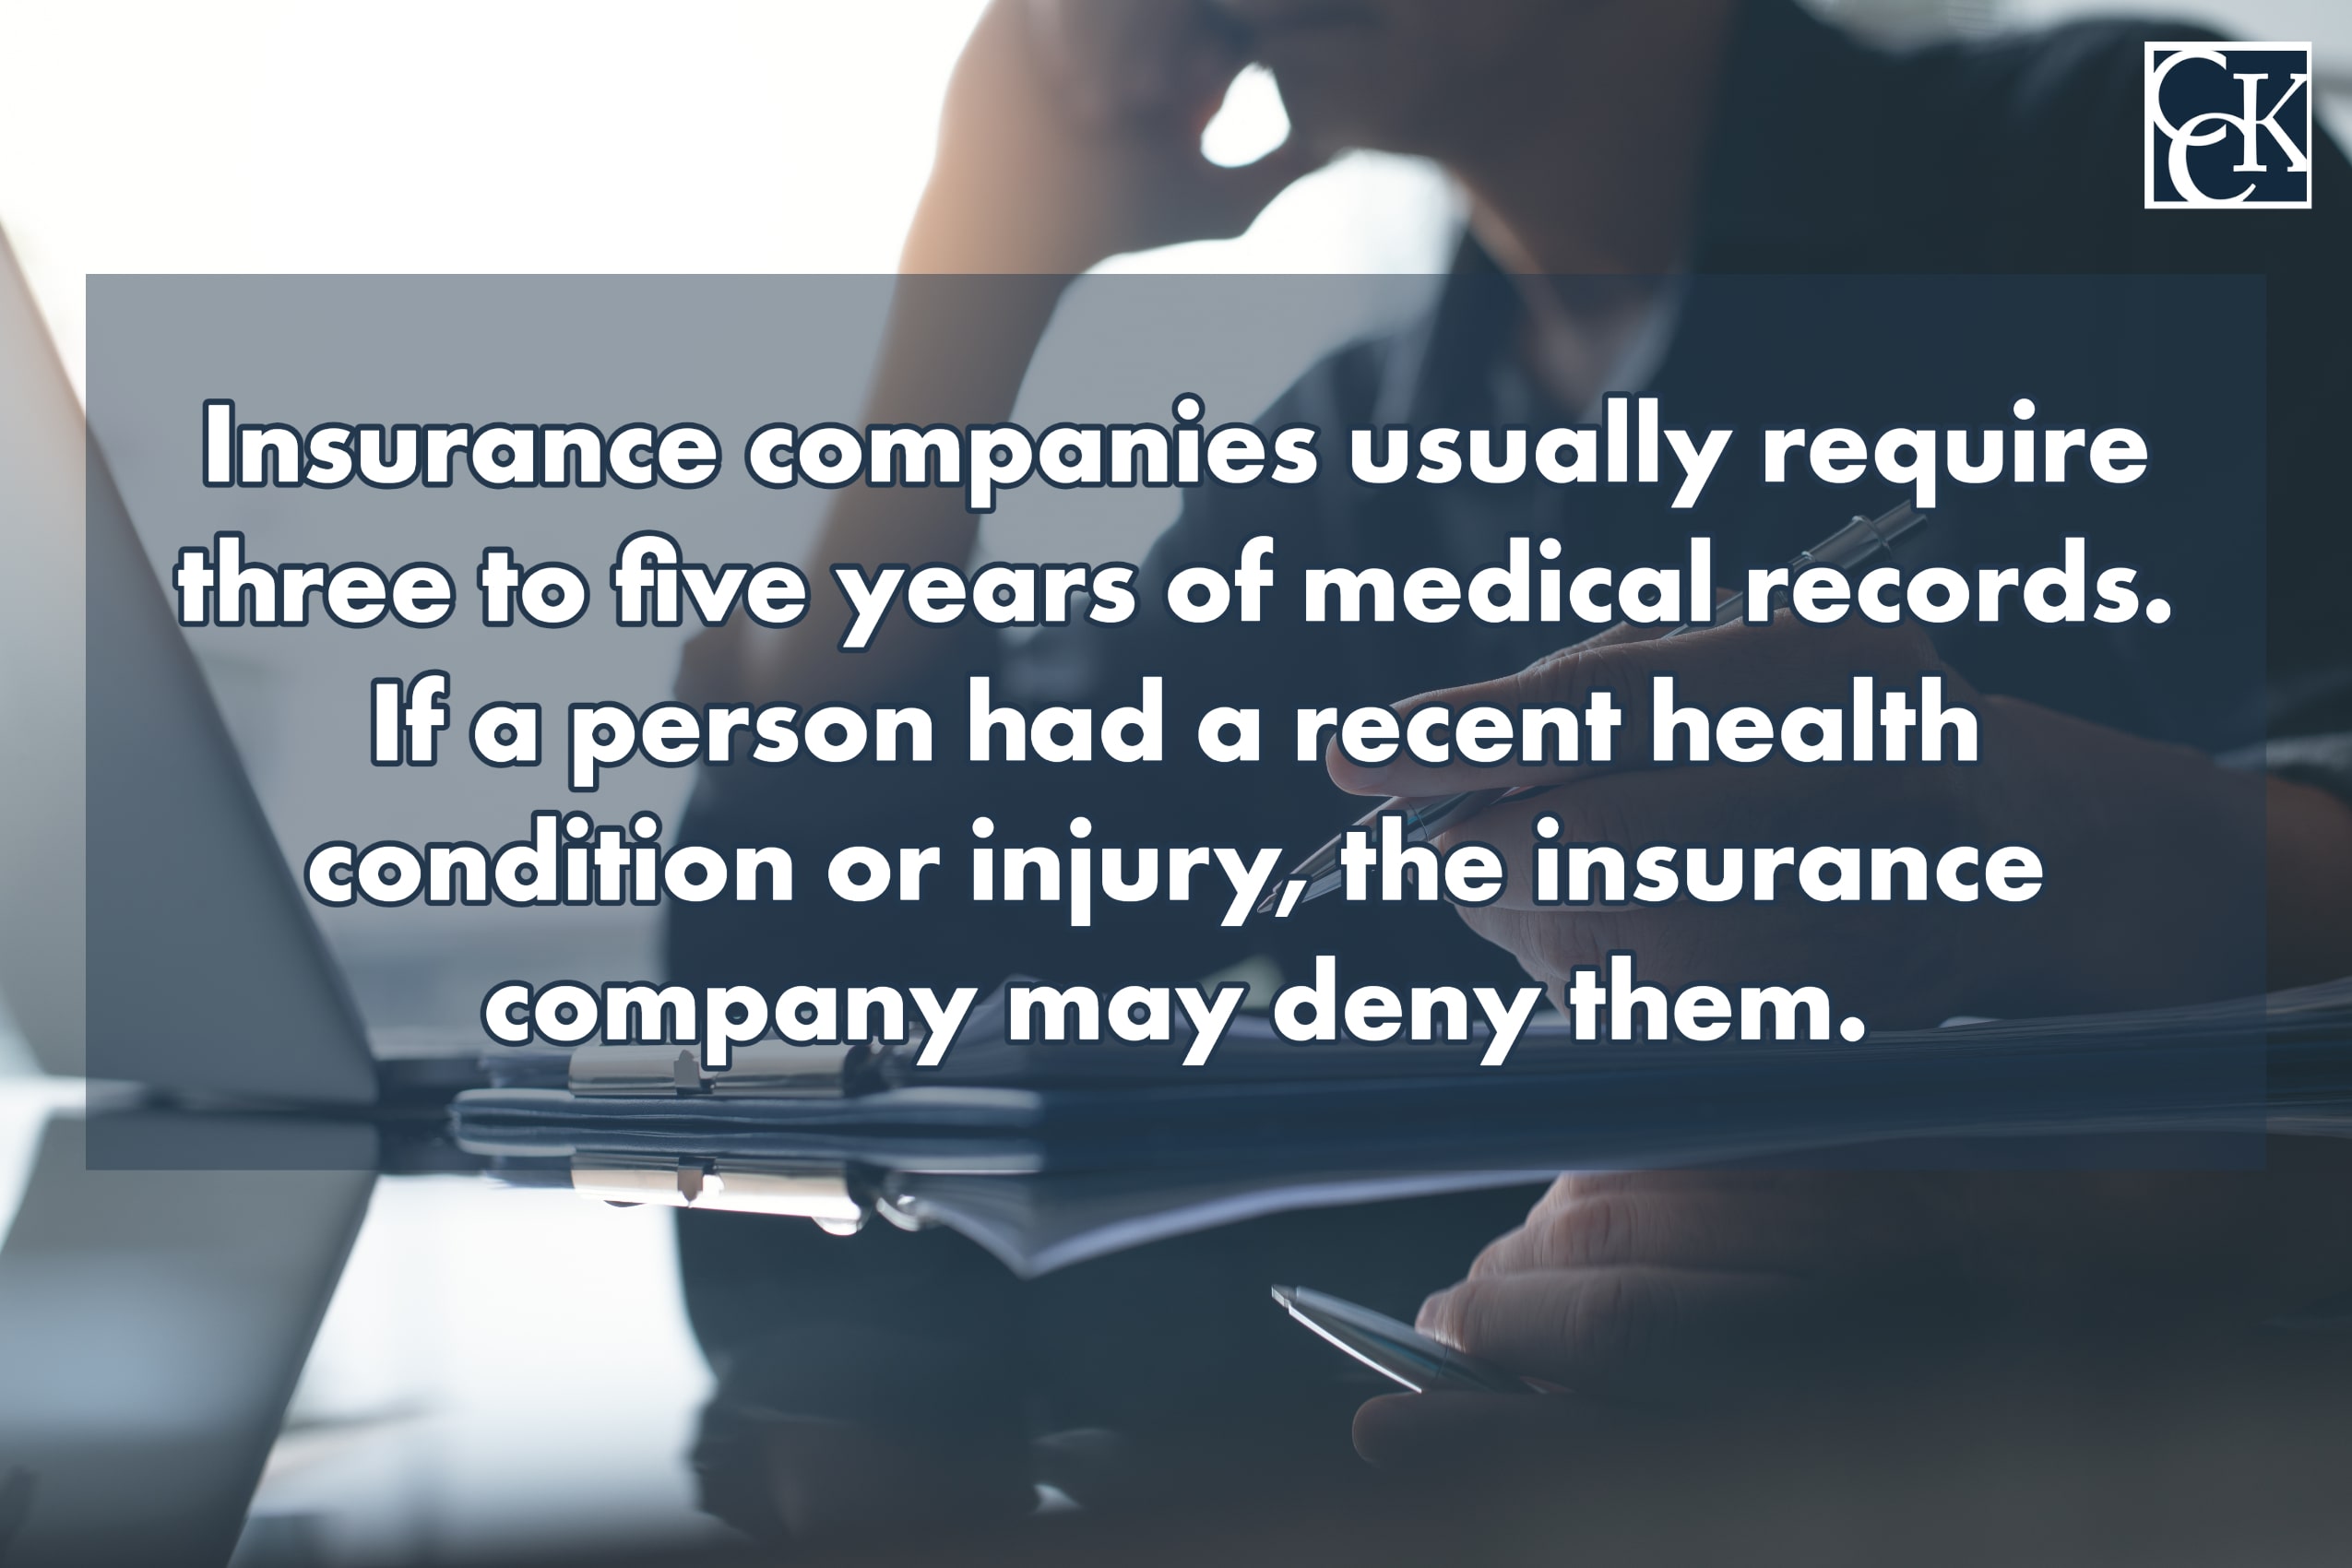 Insurance companies usually require three to five years of medical records. If a person had a recent health condition or injury, the insurance company may deny them. 